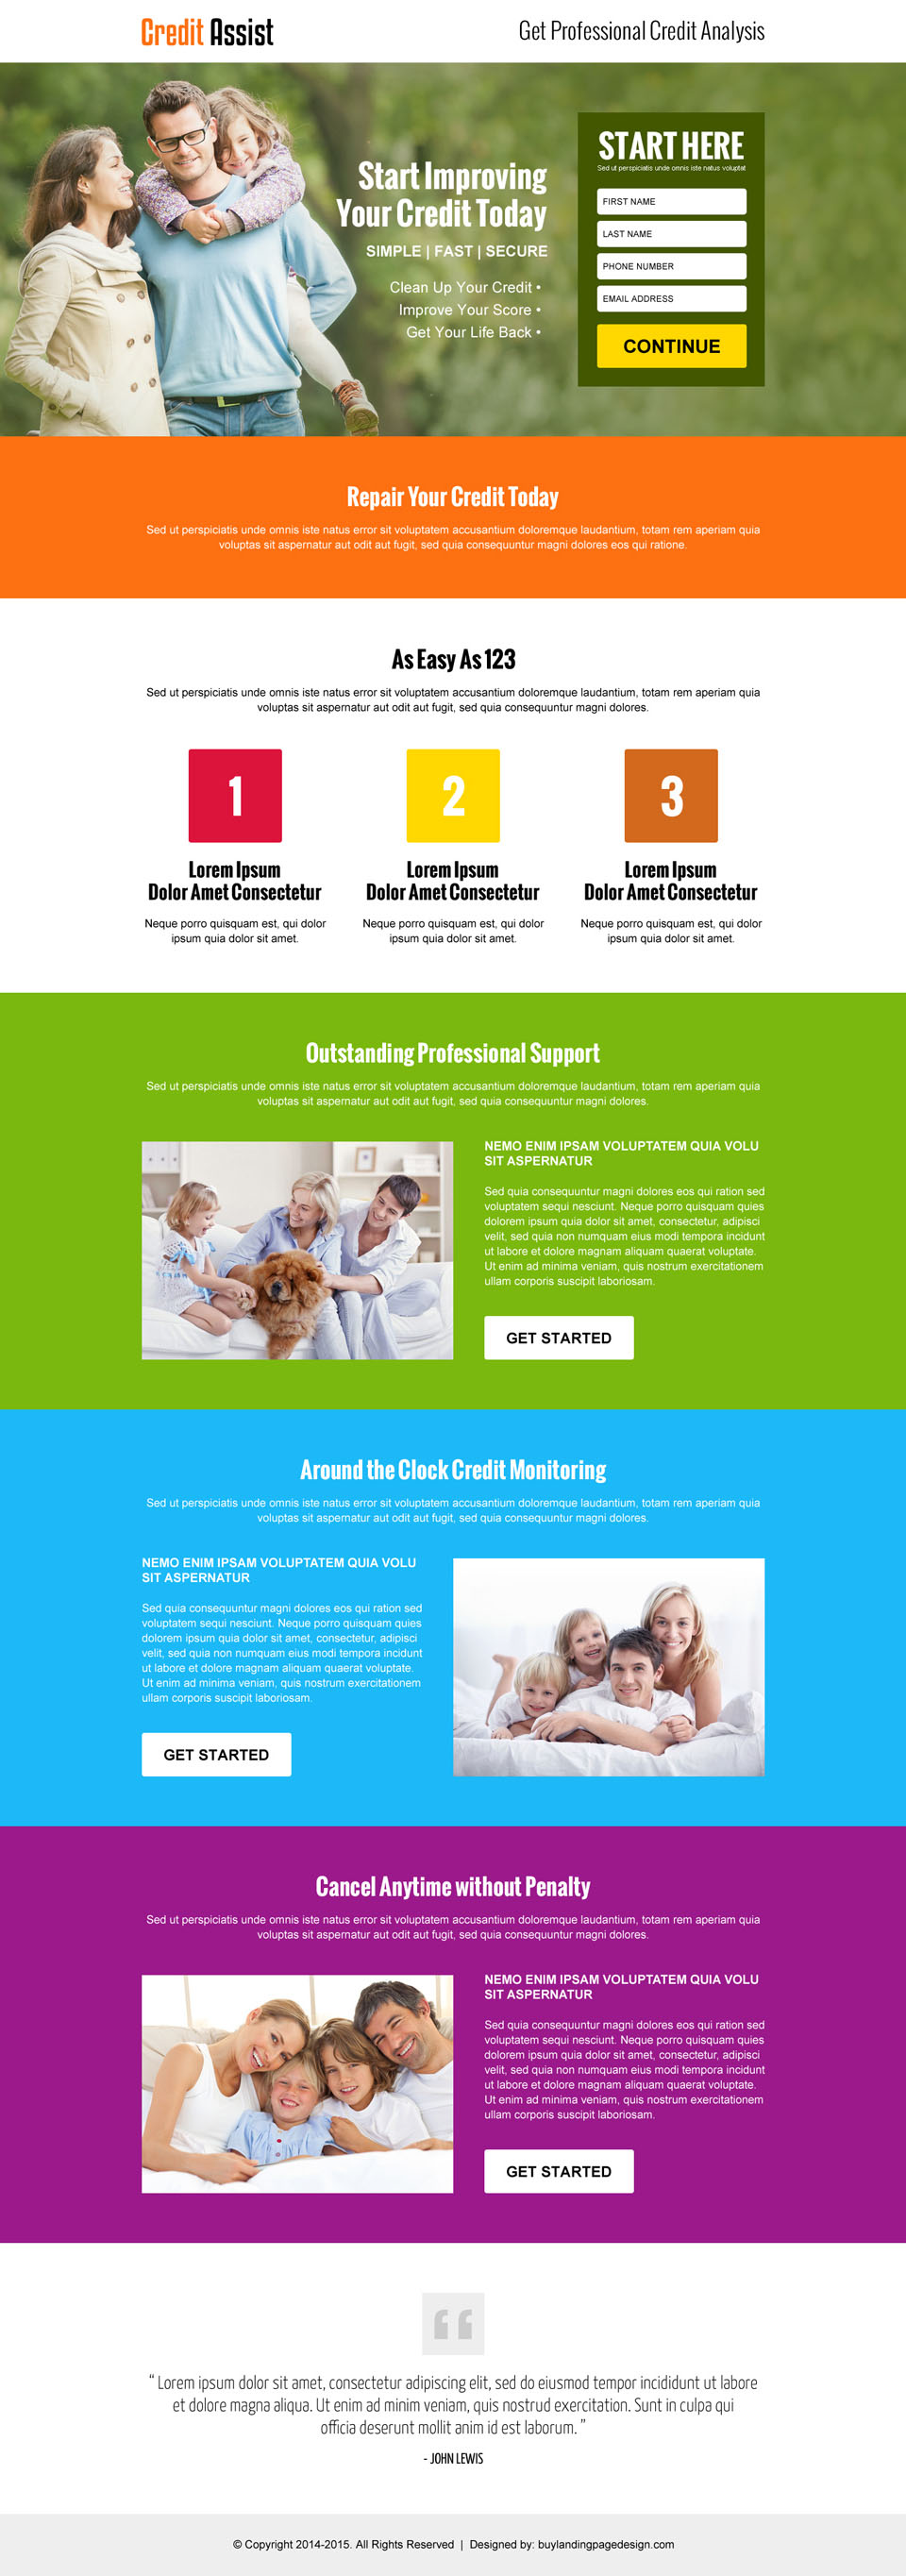 credit-analysis-service-lead-generation-best-converting-landing-page-design-template-024